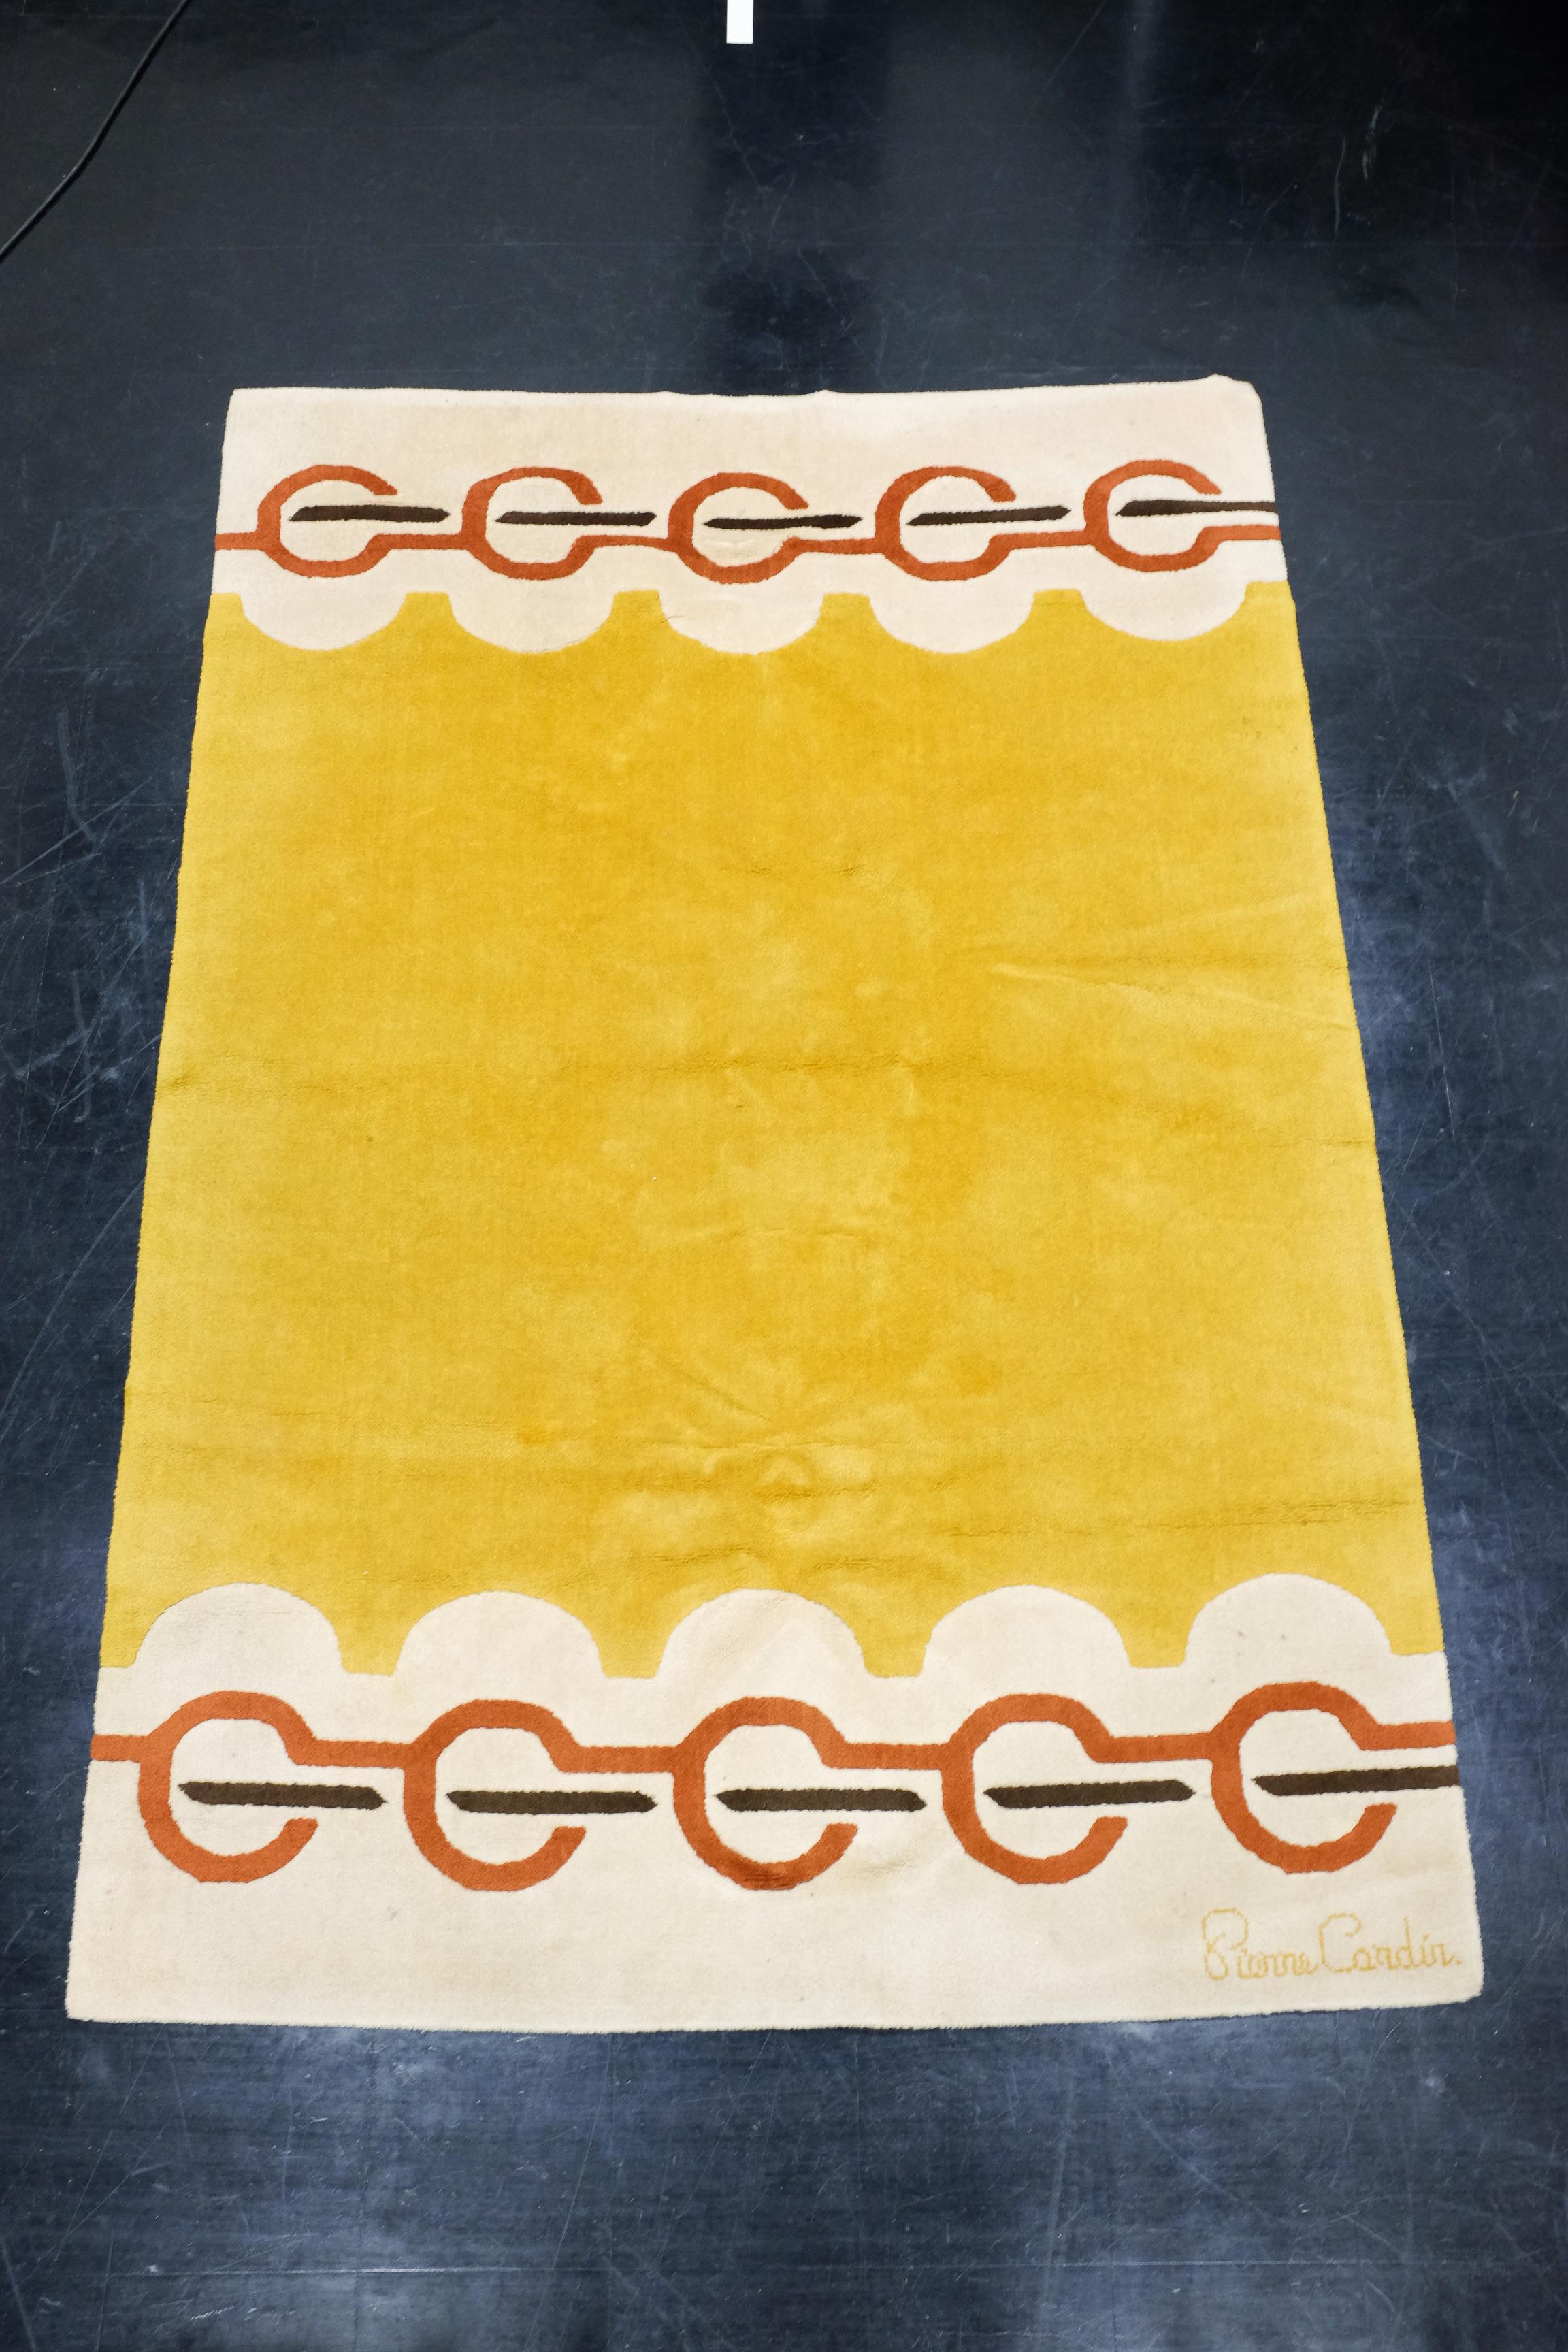 A very decorative carpet designed by French designer Pierre Cardin. The carpet has a space age feel to is with a nice pallet of colors. It is a larger model that measures 270 x 183 cm. Signature in lower right corner. 

Very good vintage condition